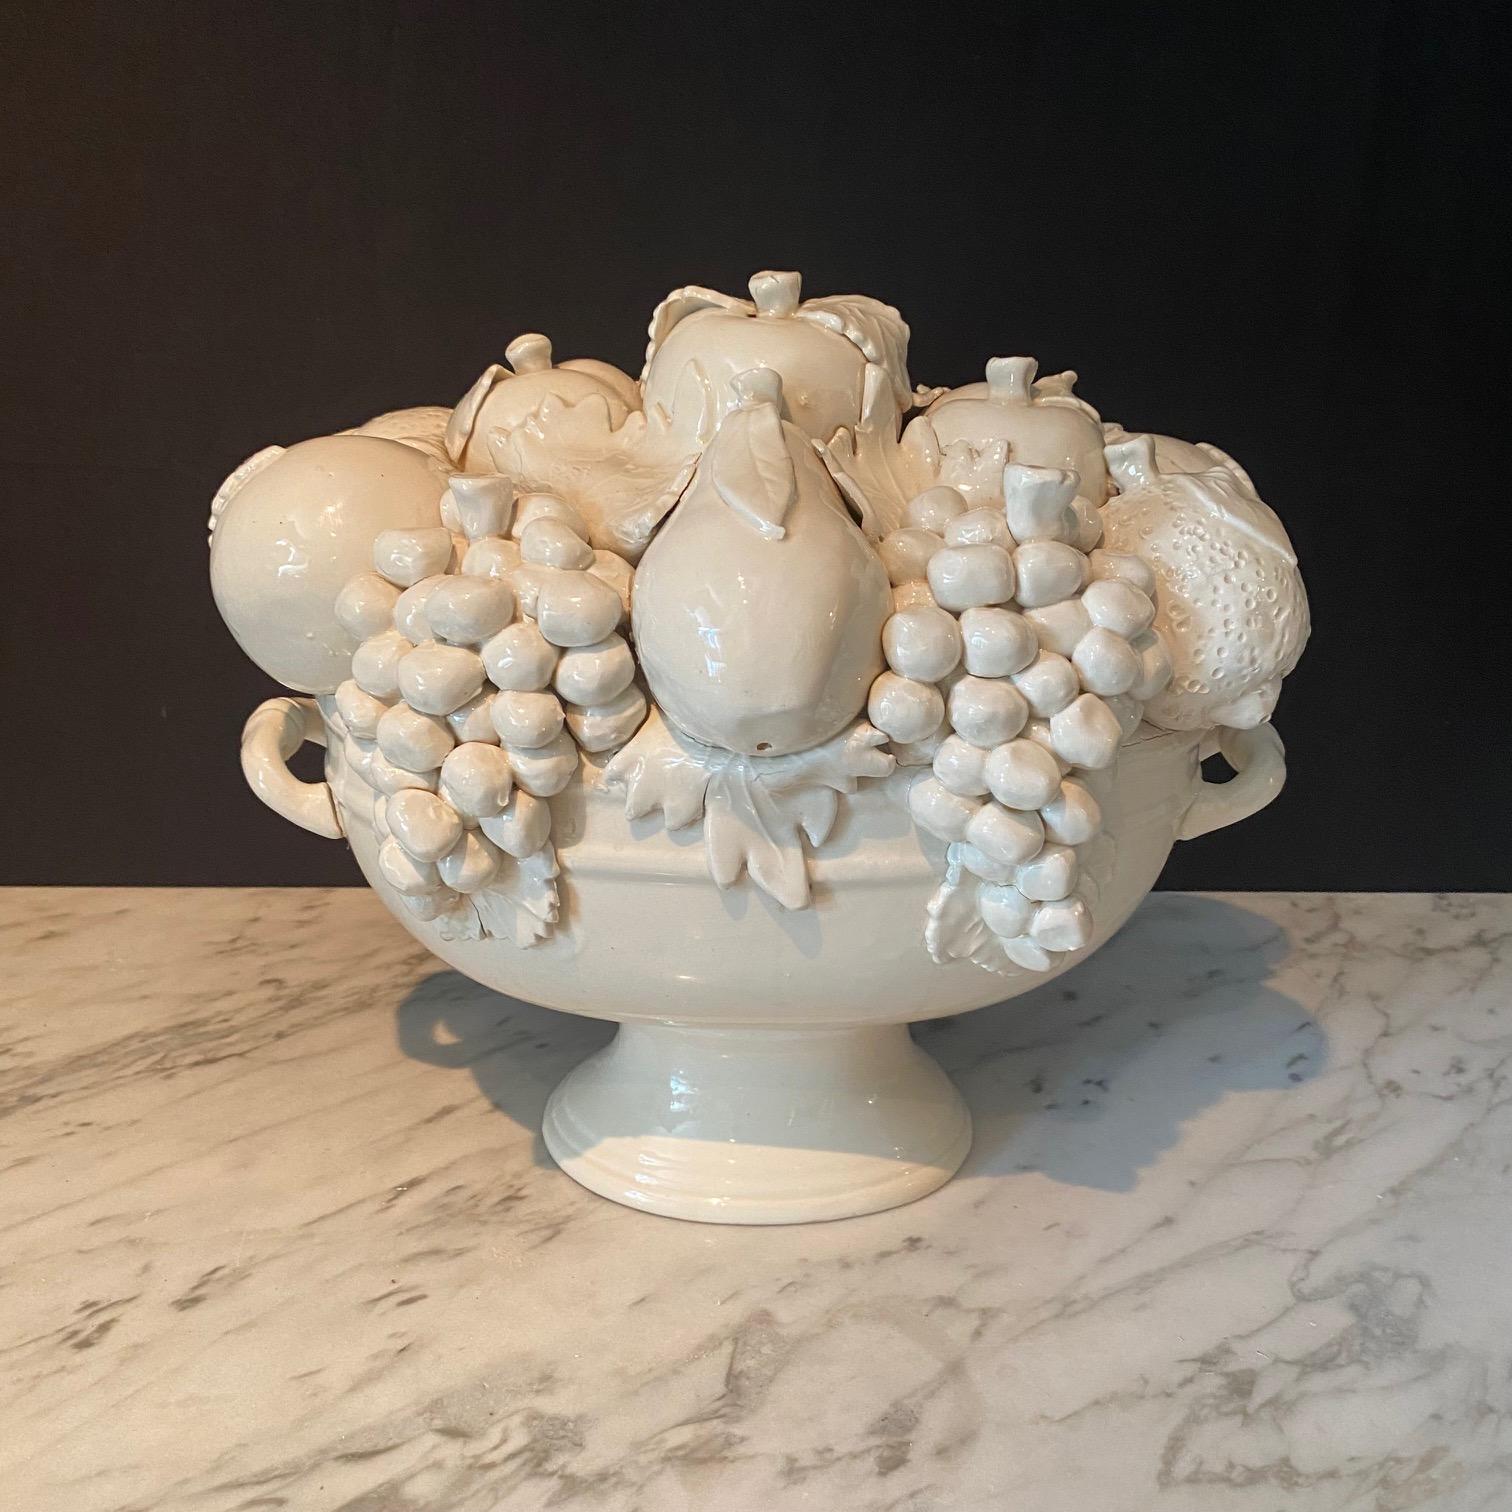 Detailed porcelain Italian large fruit or cornucopia bowl, featuring grapes, oranges, apples, bananas, peaches etc. Attention to detail as only the Italians do - this lovely centerpiece has a maker's mark on the bottom. #7144

